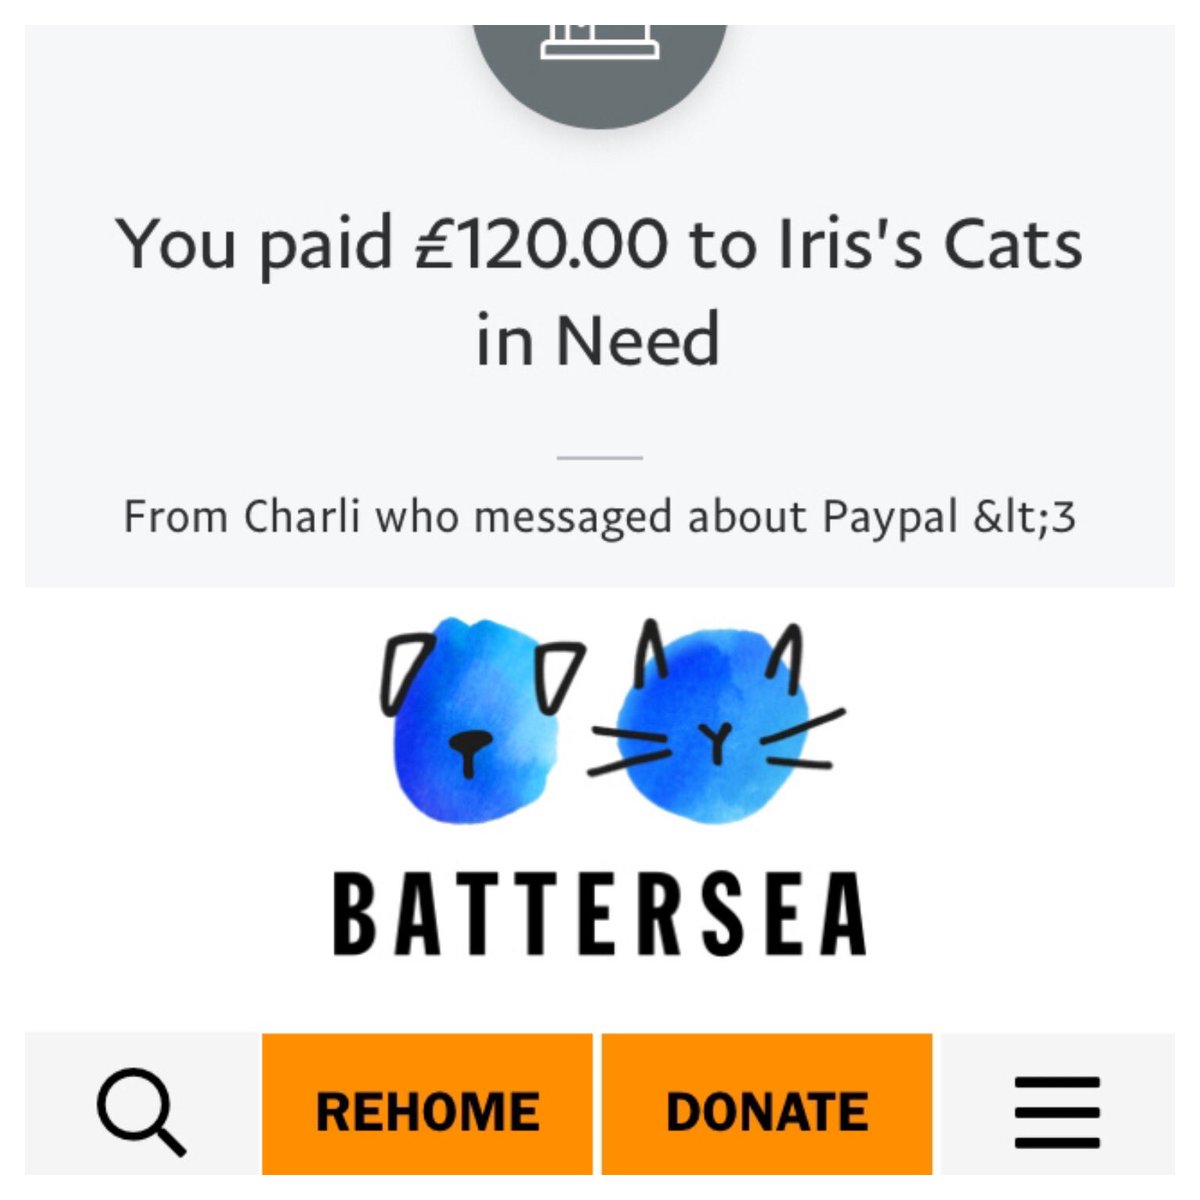 Birthday fundraiser 2020Last year, we managed to raise £120 for Iris’ Cats In Need. This year, I want to help Battersea, the rescue for cats and dogs. To donate, send your desired amount to my Paypal. Your donation will be screencapped (name + photo censored) and posted here.